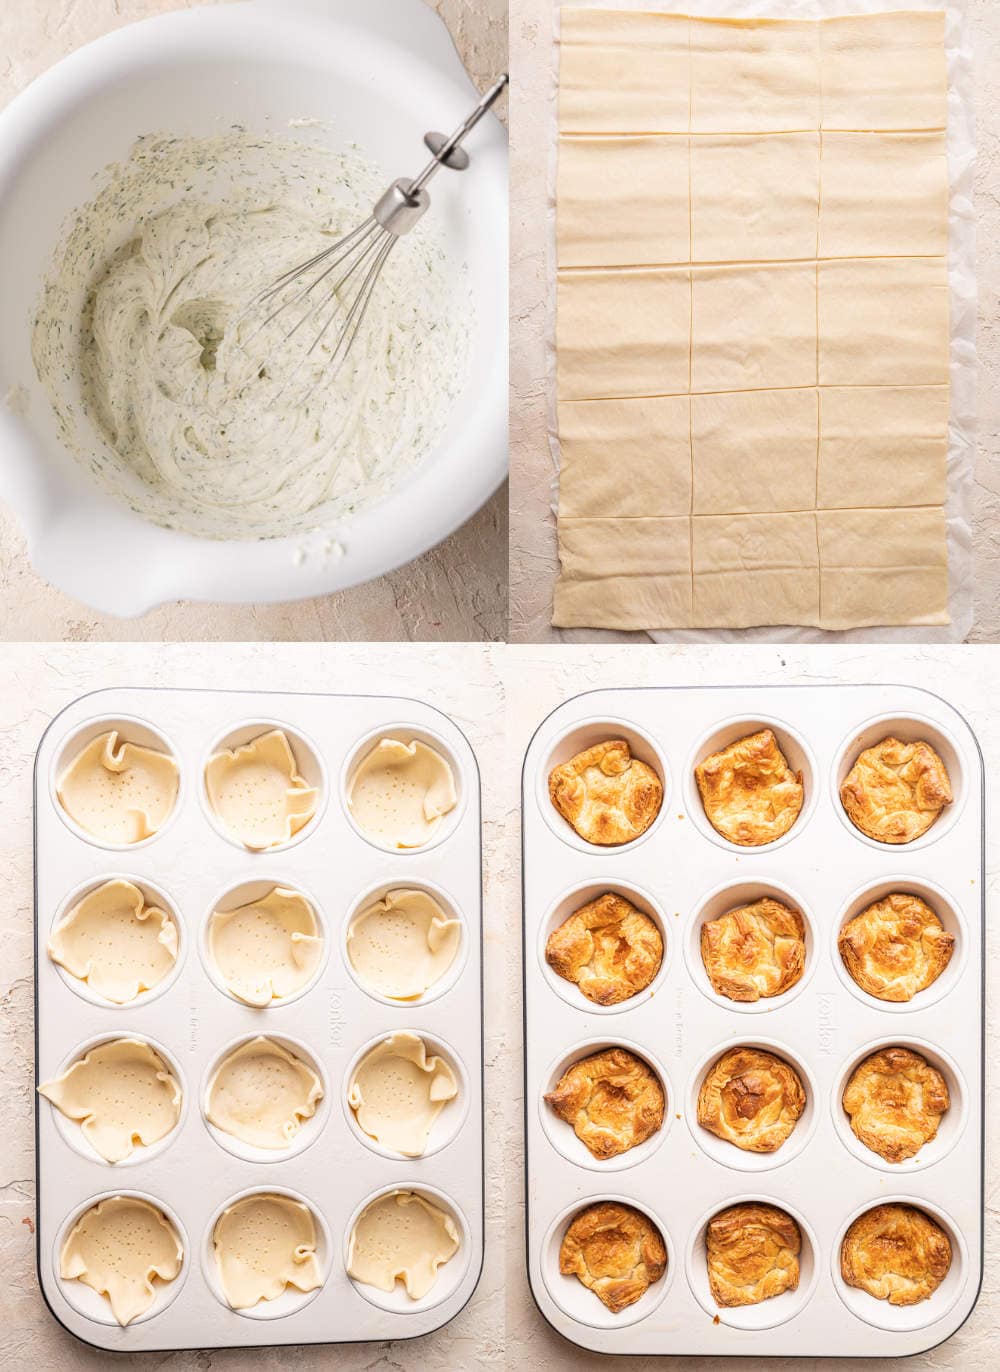 A collage of 4 photos showing how to make smoked salmon puff pastry bites step by step.